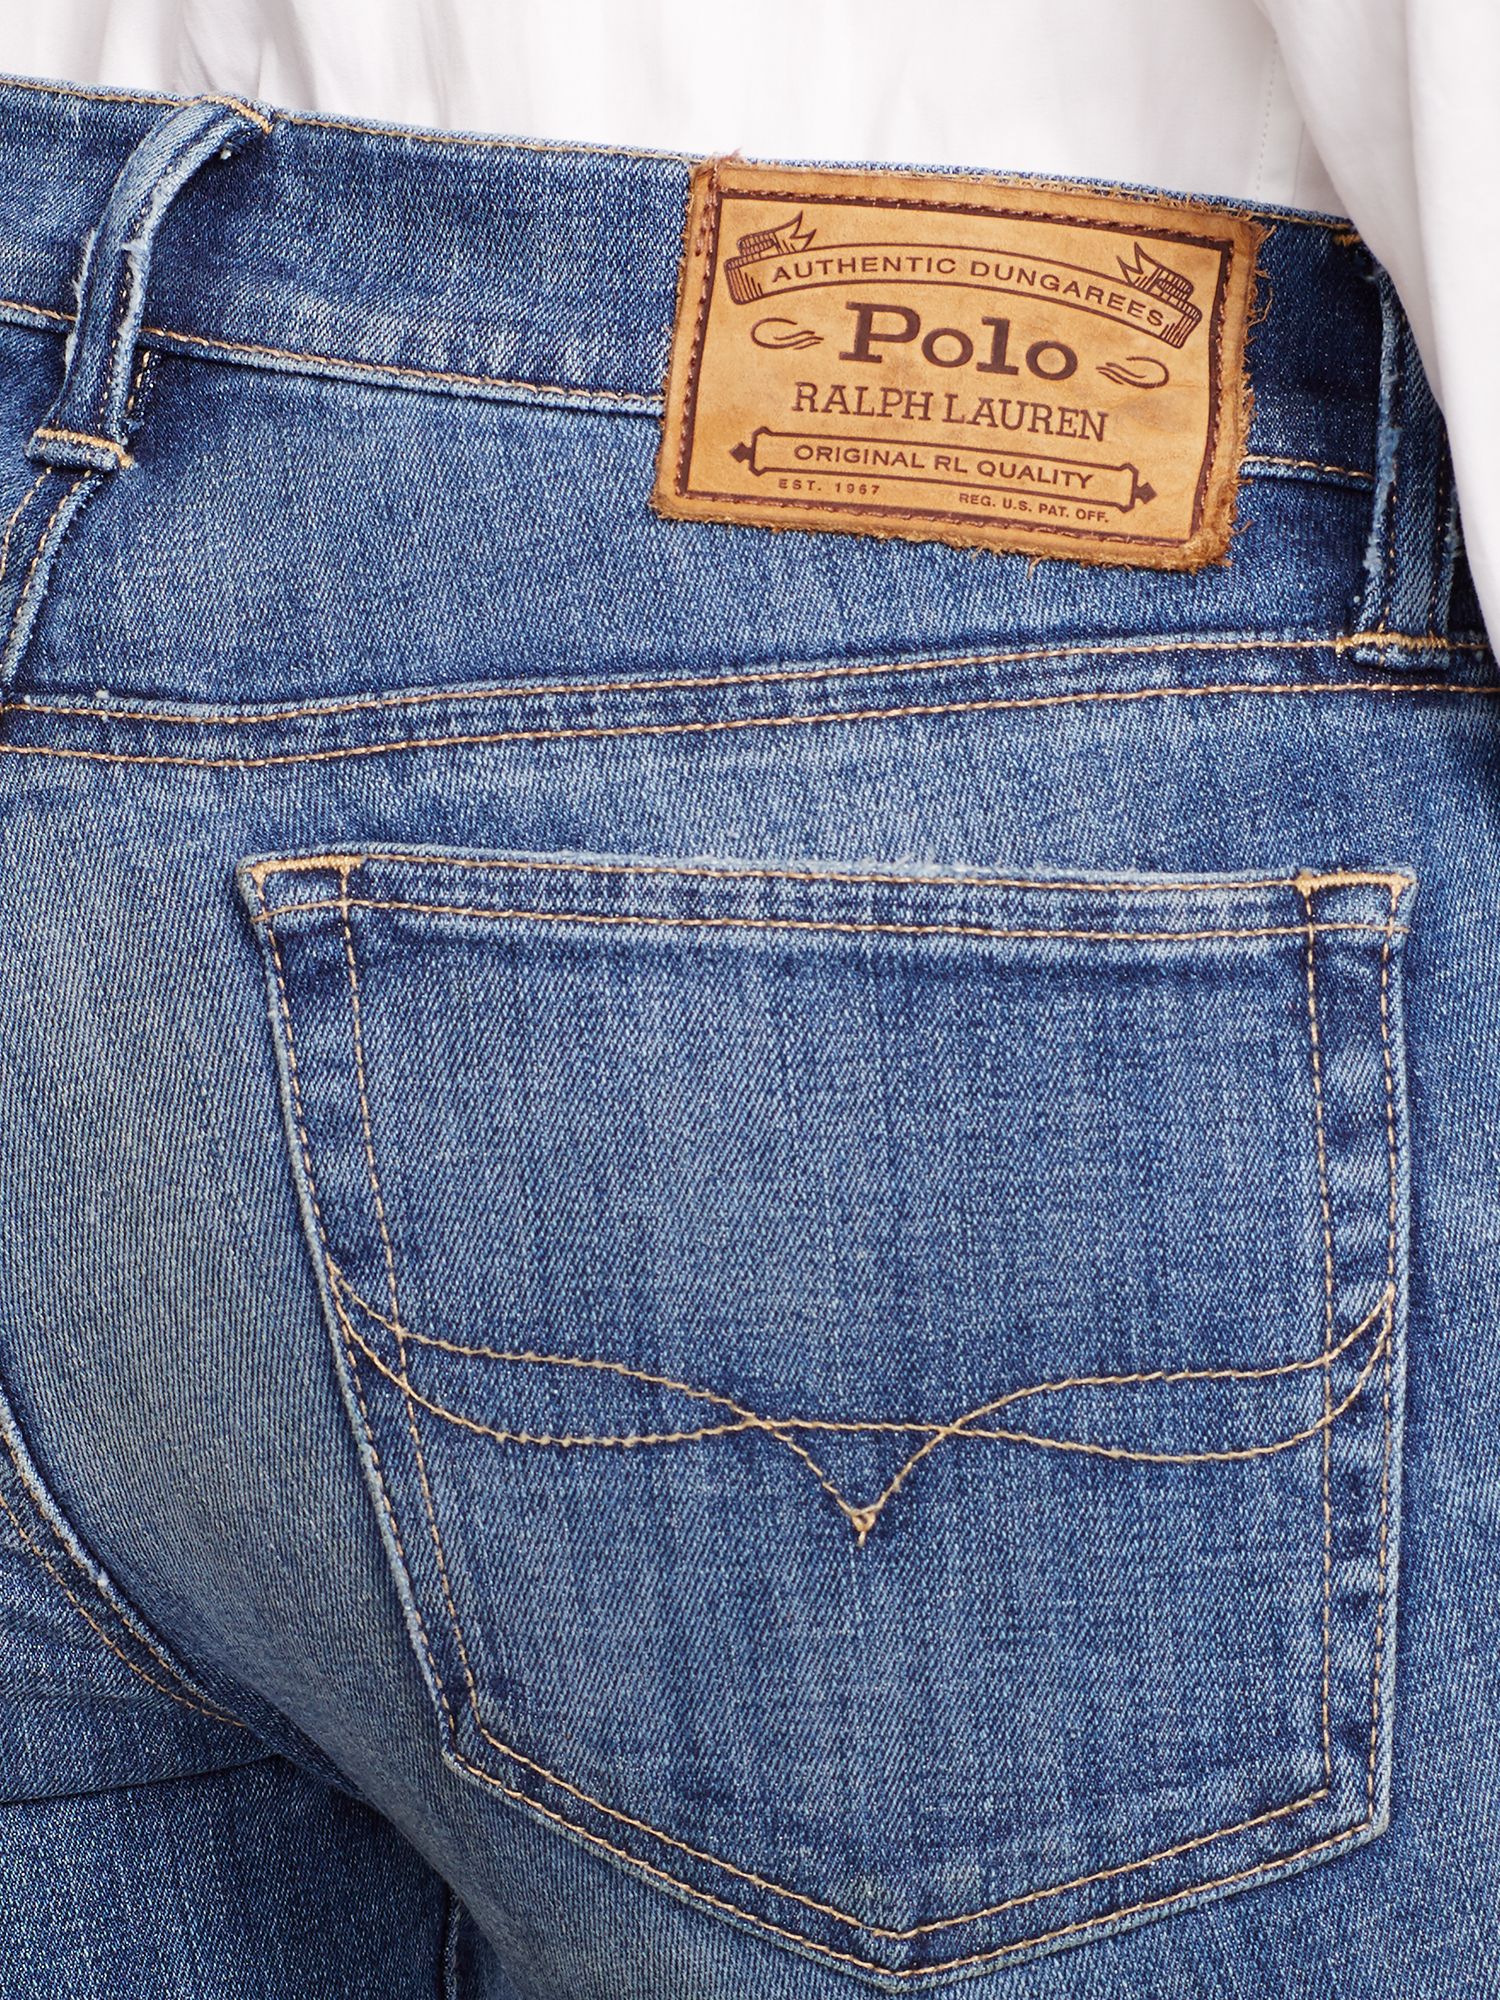 polo jeans for women